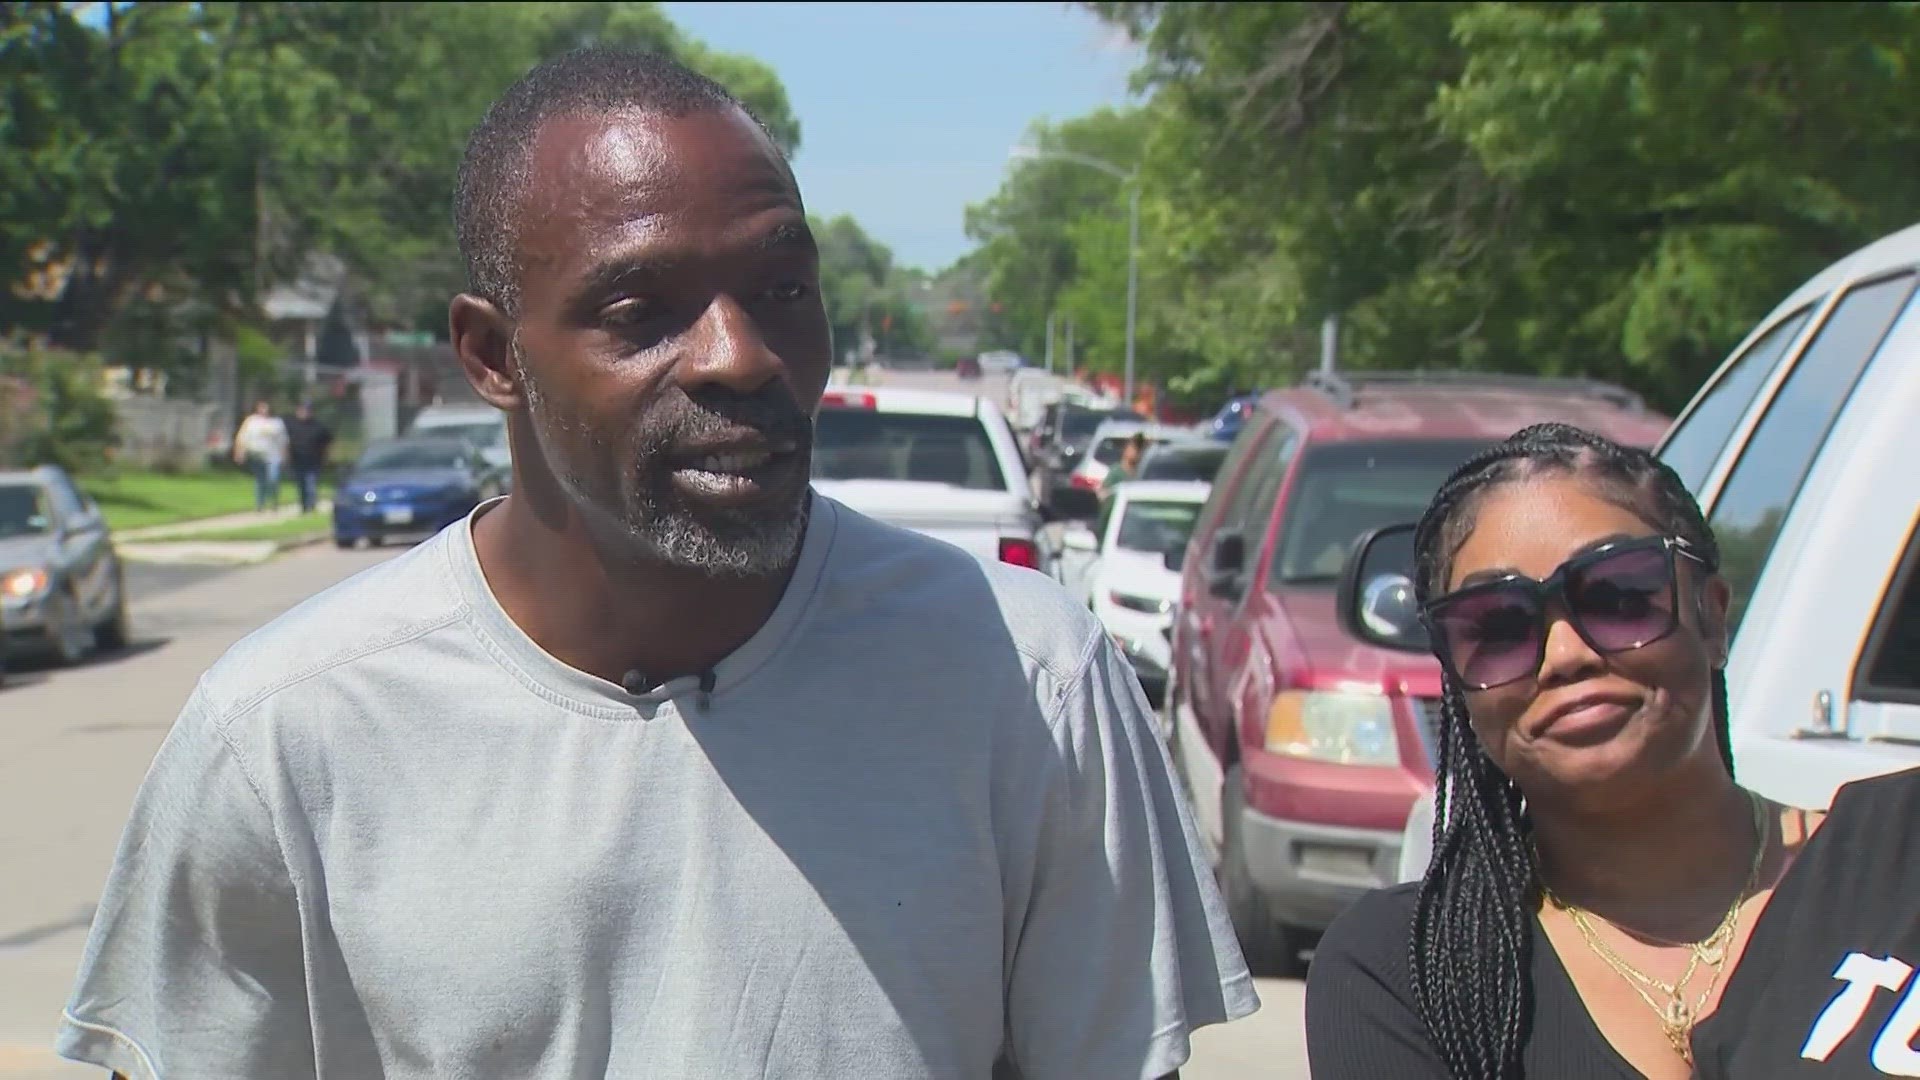 Family and friends came together on Saturday to support a man who lost almost everything in an East Austin house fire. They're hoping to restore the house.